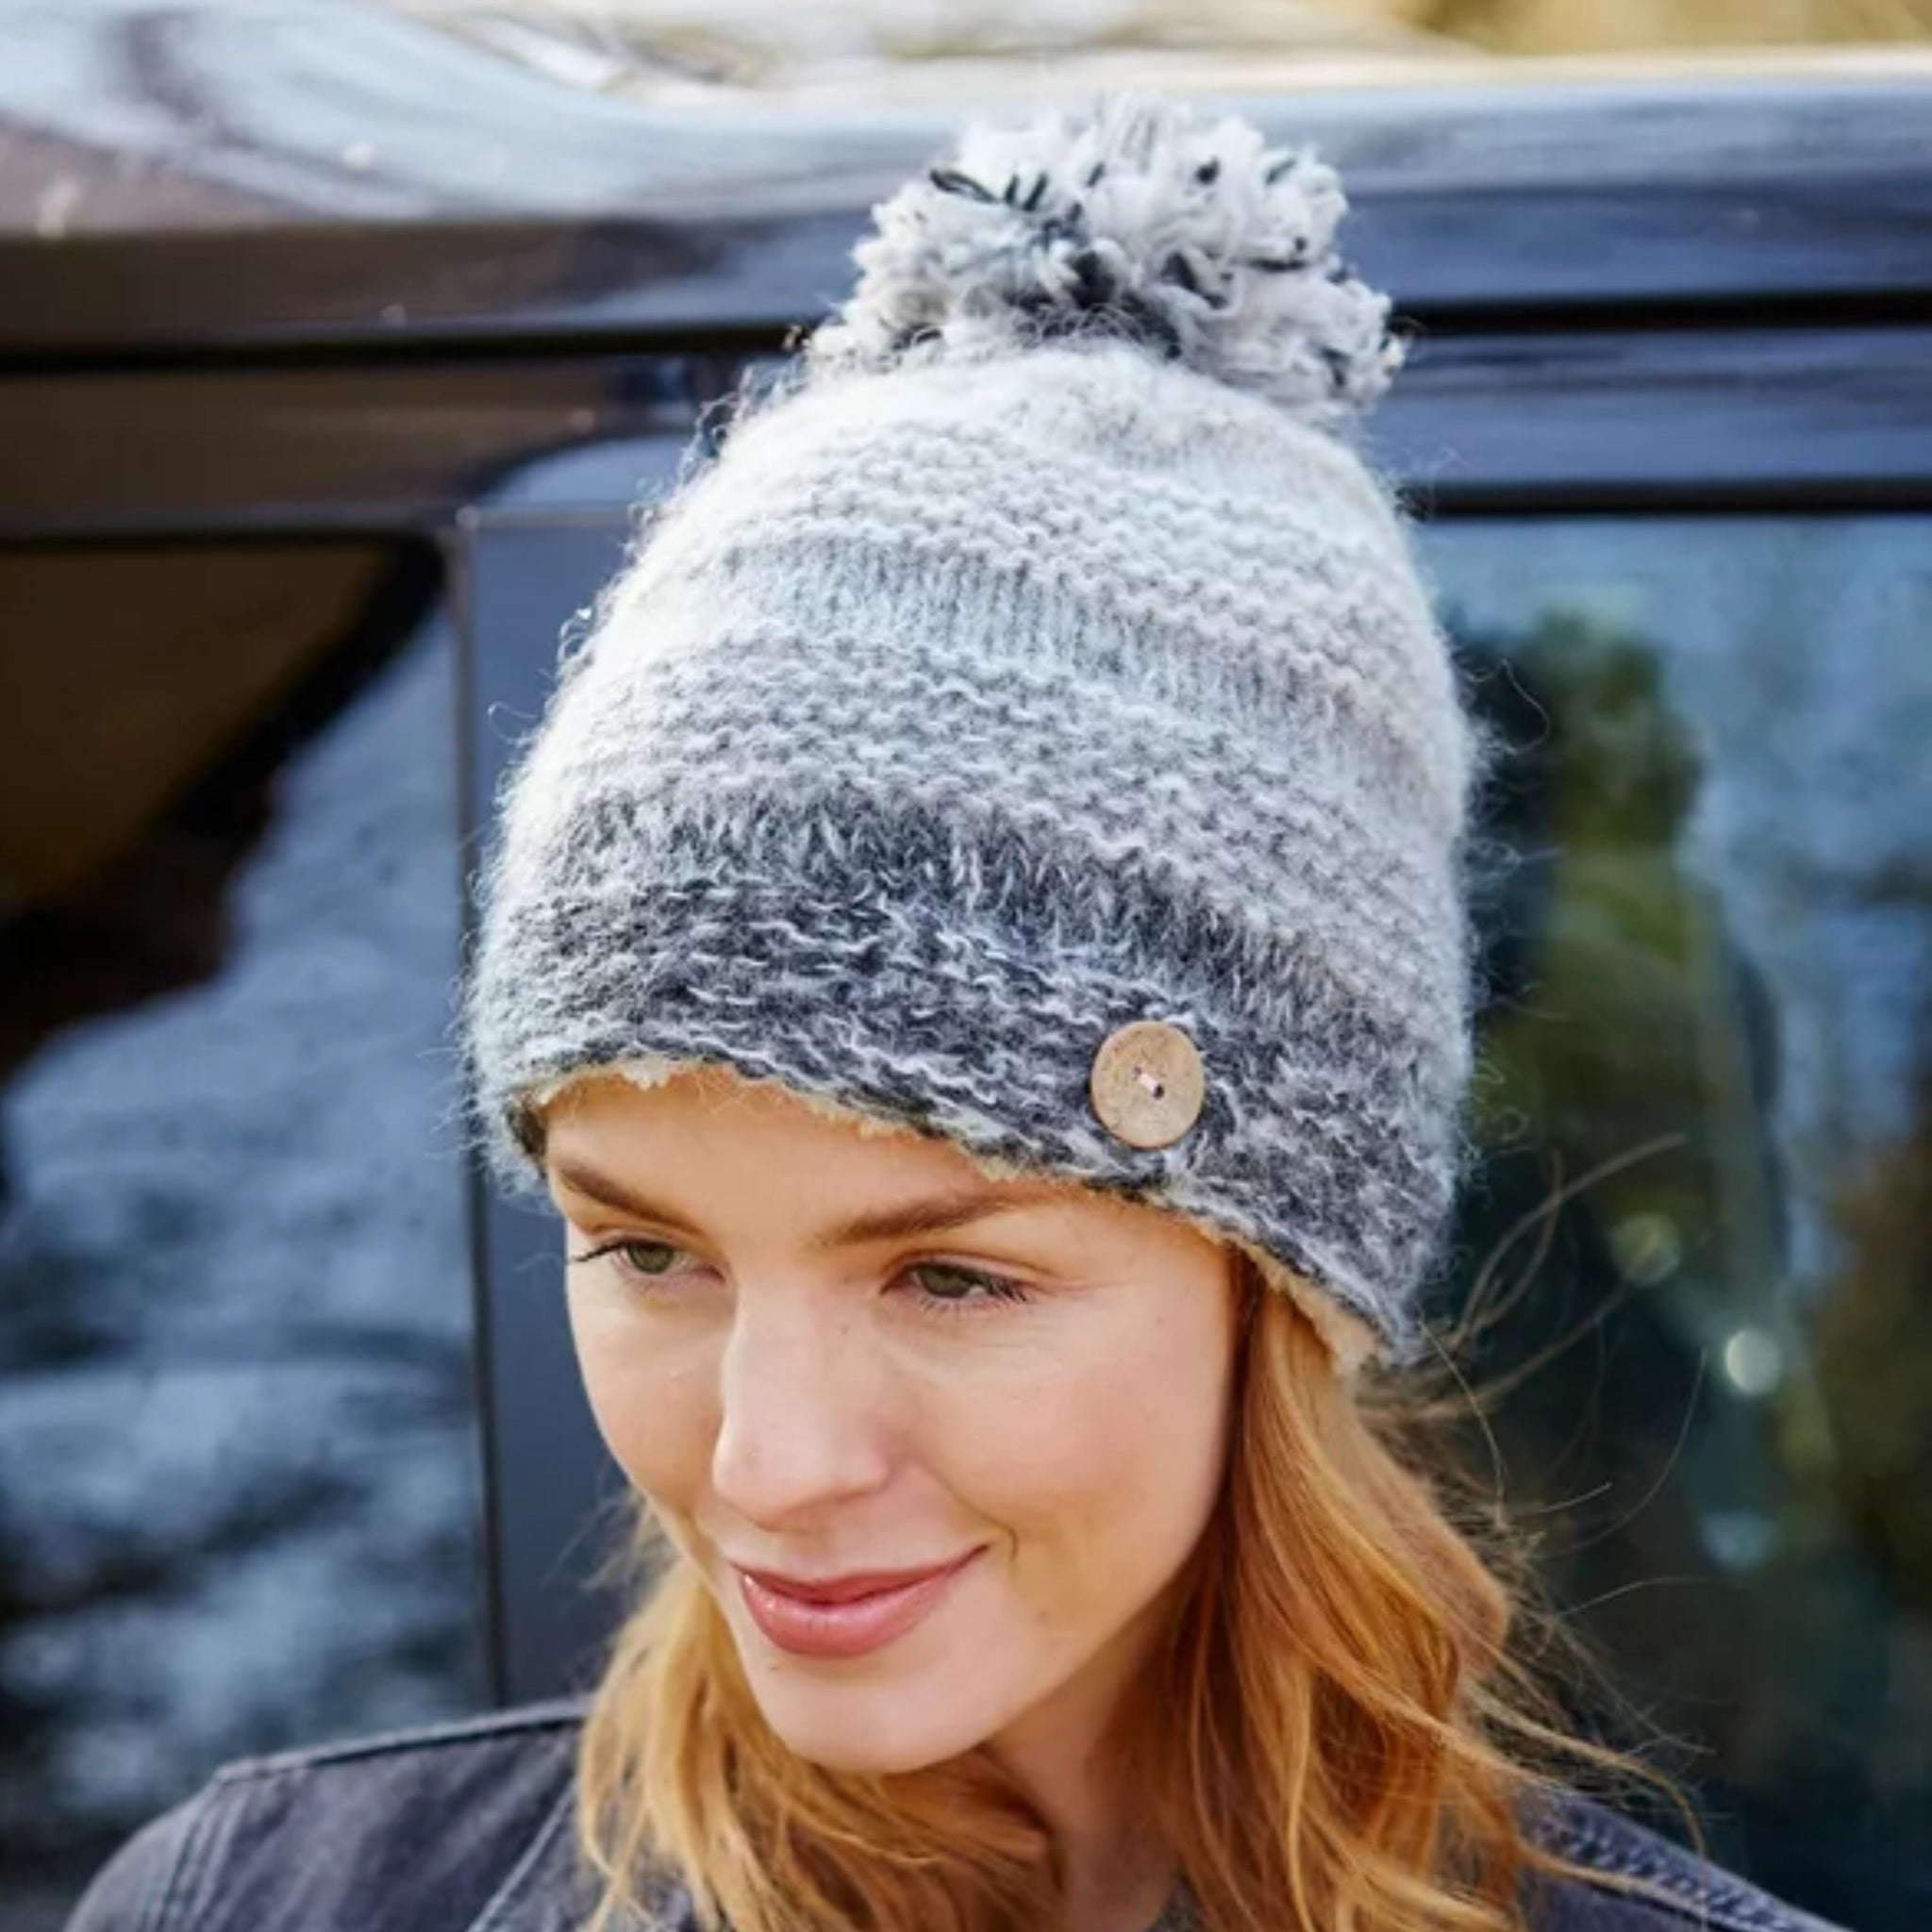 The Hat Shop Ladies Pachamama Sierra Nevada Sherpa Lined Bobble Beanie